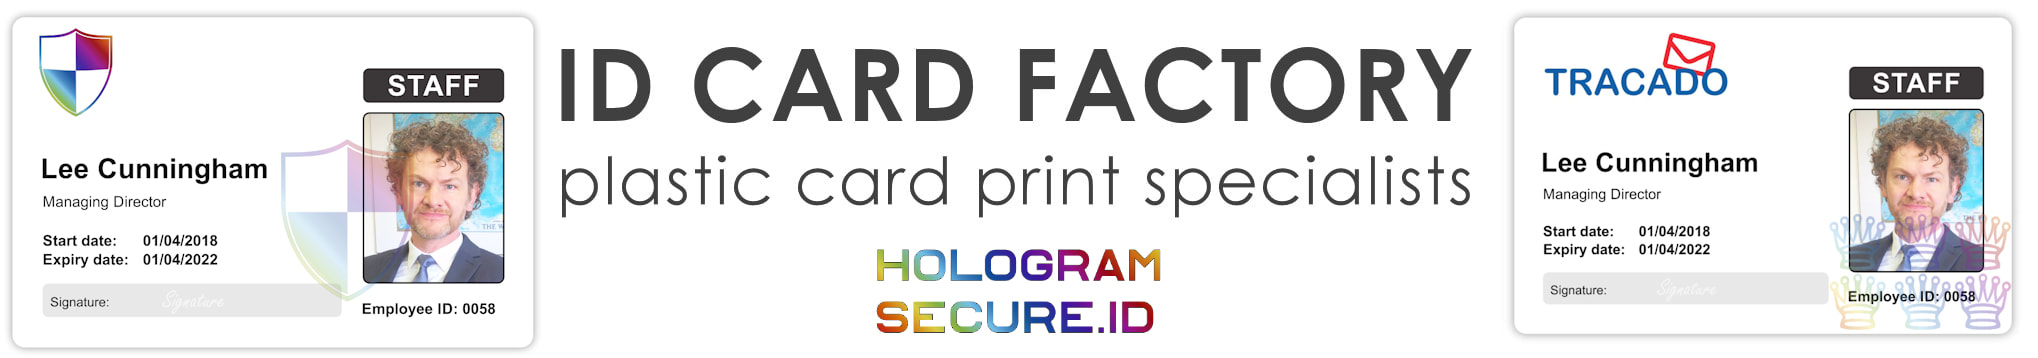 Sheffield holographic ID cards | examples of staff photo ID cards | samples of employee Identity card printing | Workers ID cards printed with hologram